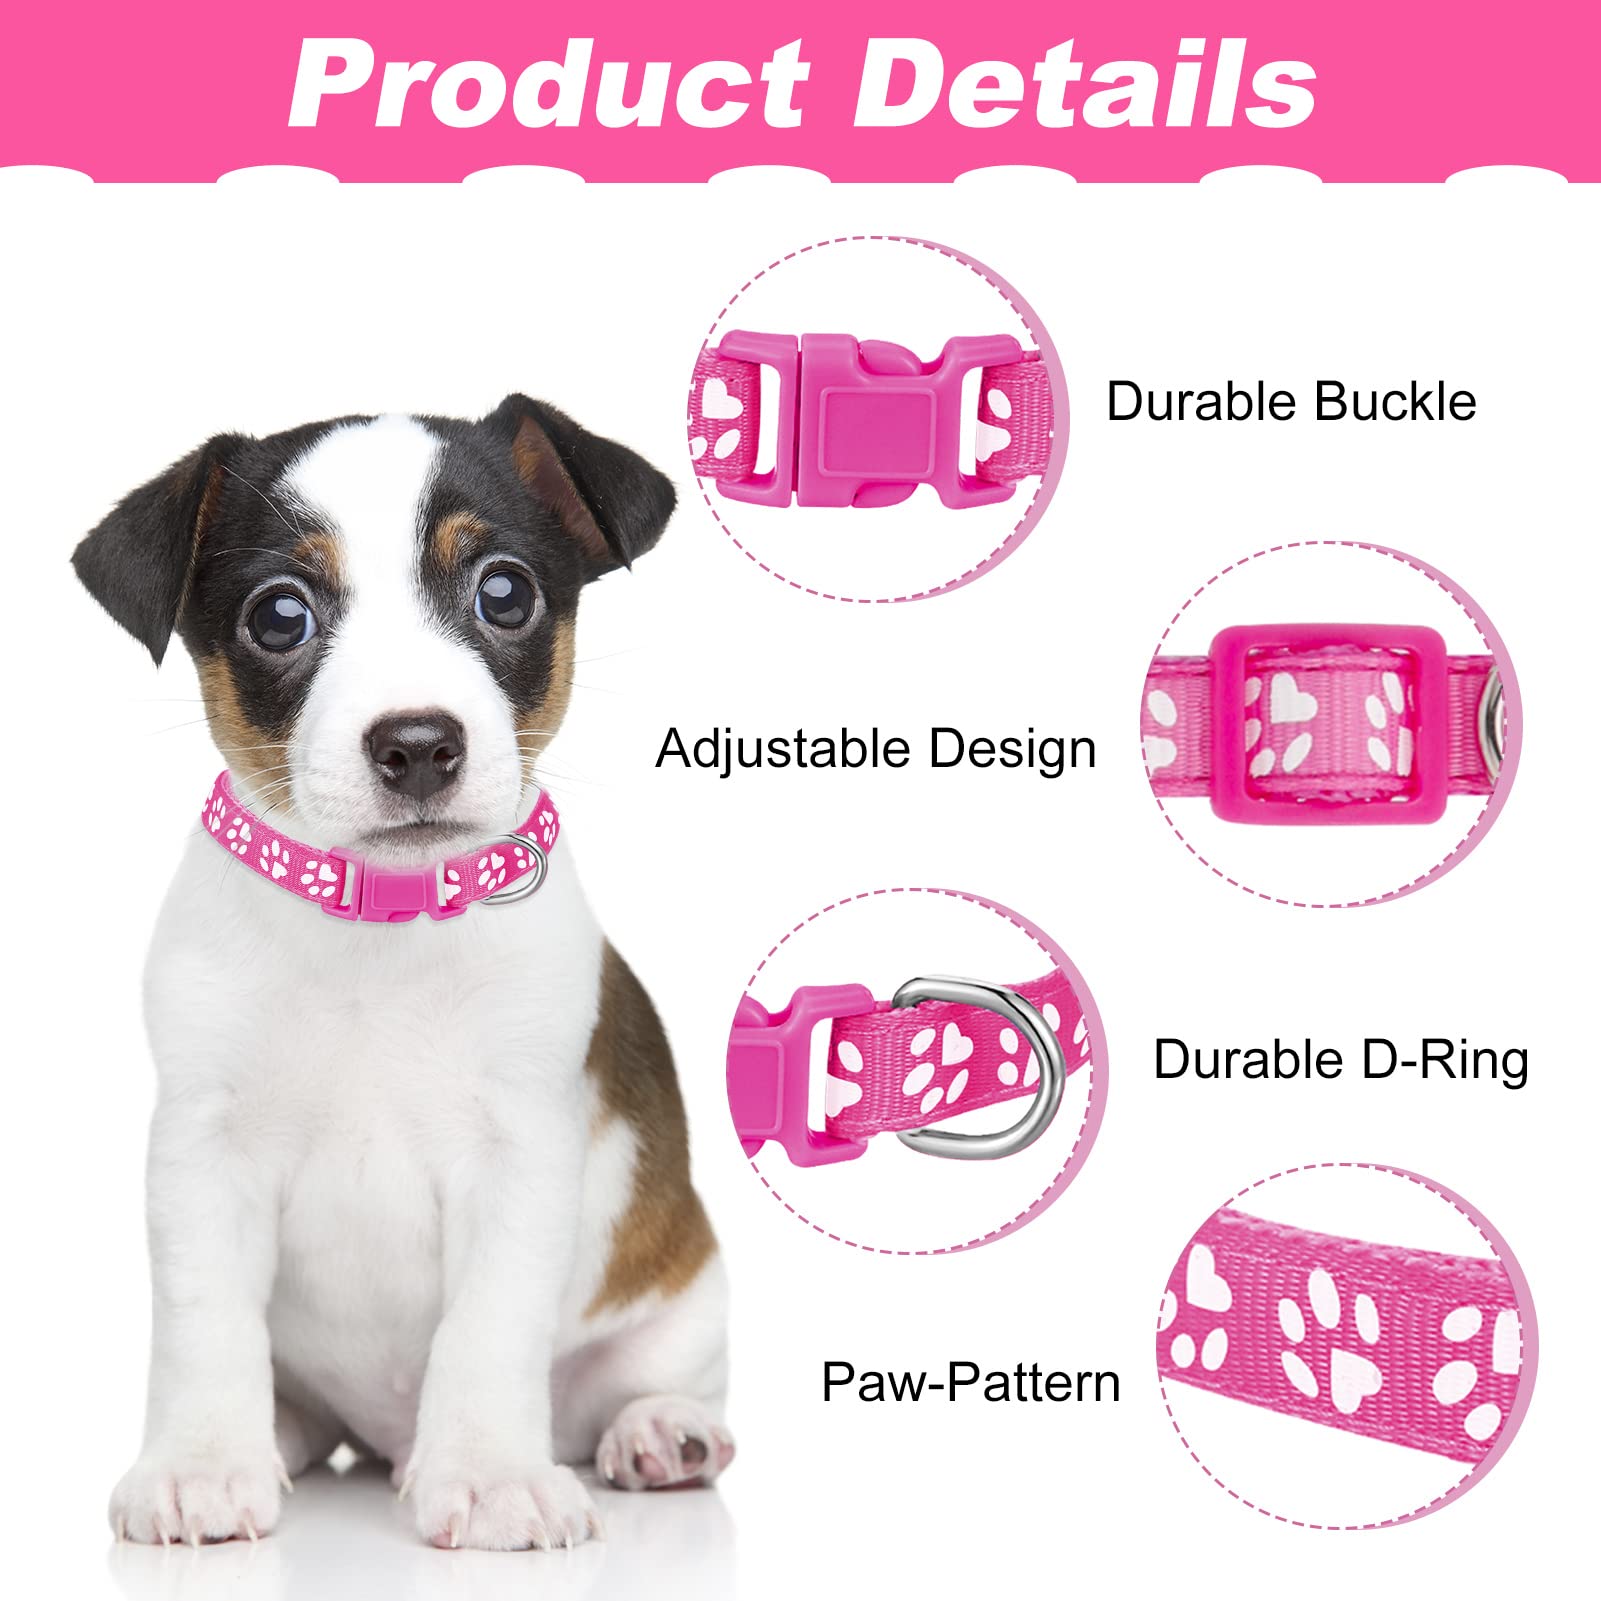 BOUMUSOE 18 Pcs Puppy Collars for Litter Adjustable Puppy Whelping Collars Soft Nylon Puppy ID Collars with Safety Quick Release Buckle for Small Medium Dogs( 17-26cm )